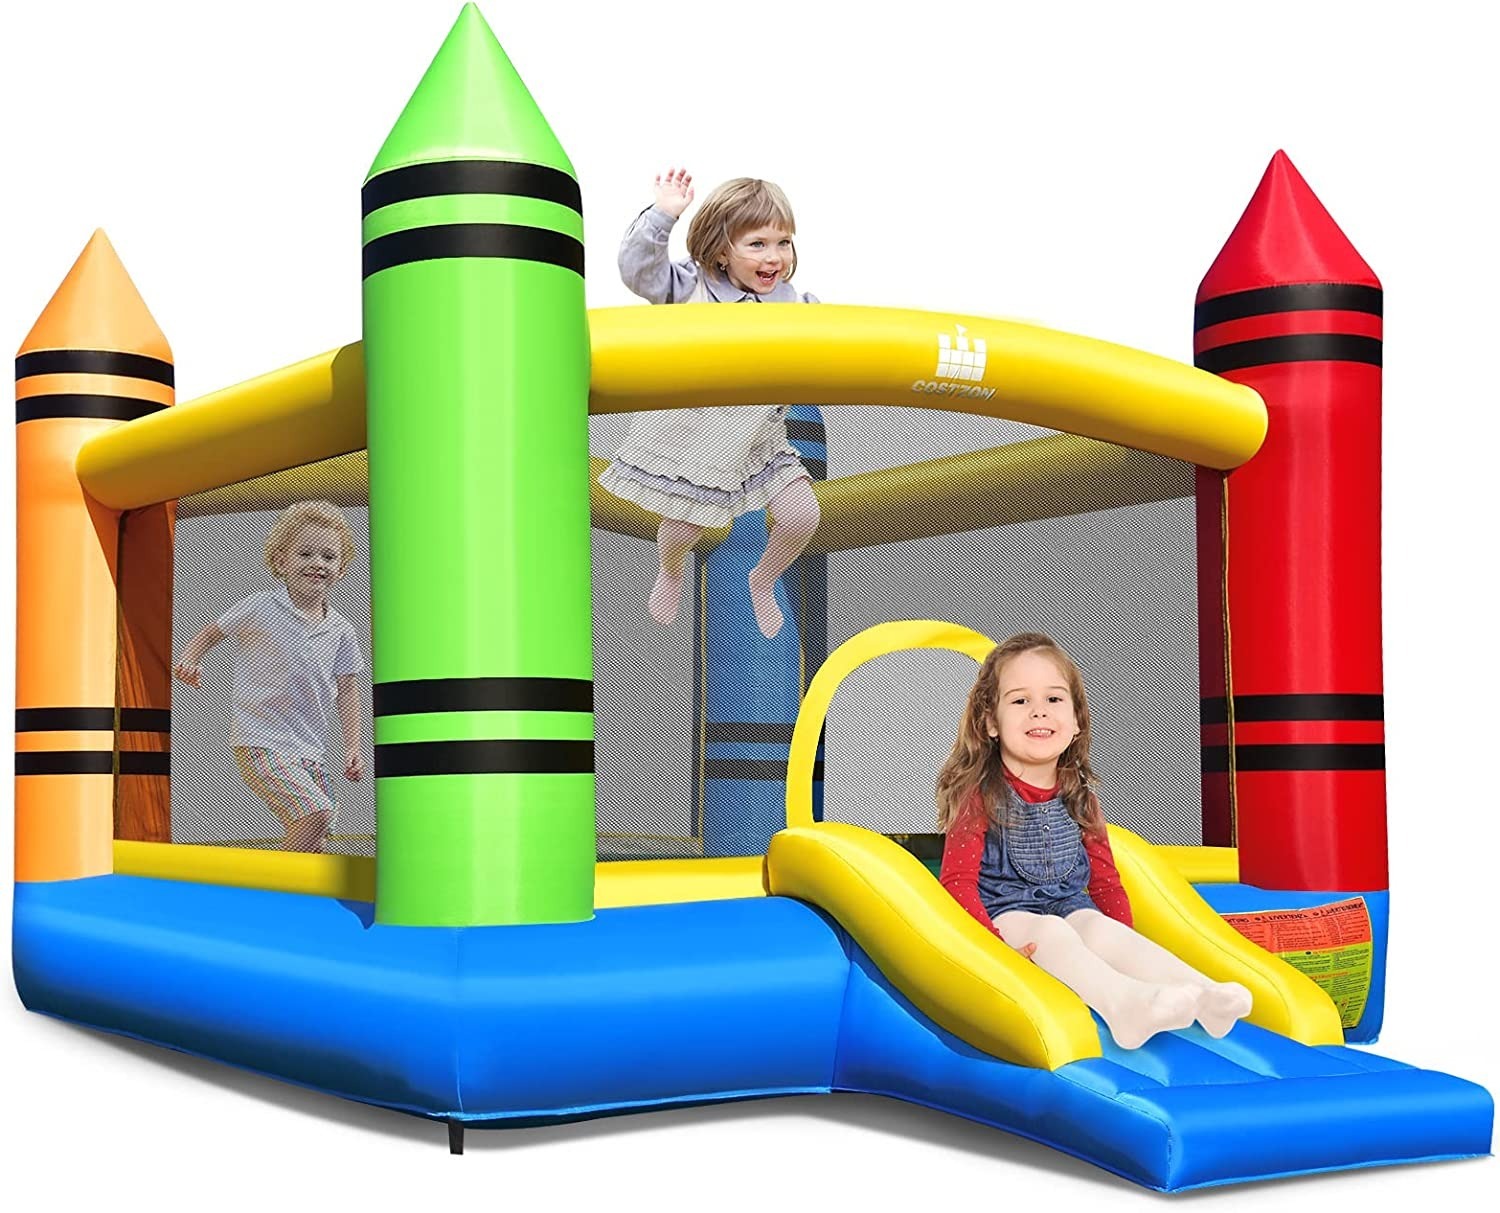 Kids Inflatable Bounce House w/ Large Jumping Area & Mesh Walls (Crayon Style) $120 + Free Shipping